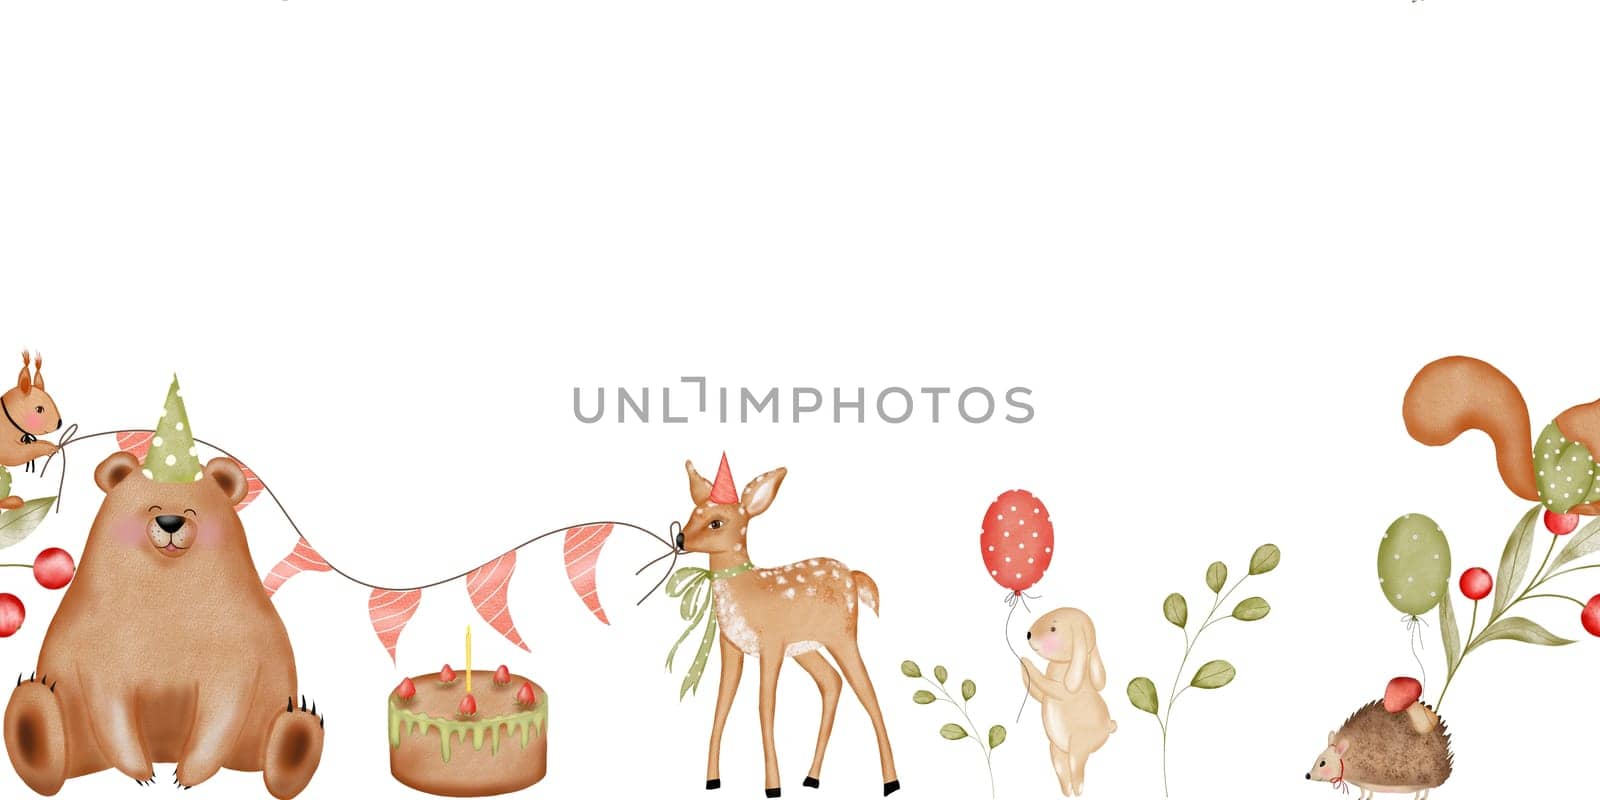 Watercolor illustration isolated seamless border with cute forest animals bear, fawn, squirrel, hare, hedgehog and birthday cake. Birthday theme pattern. Fabric edge. For the design of banners and cards. by TatyanaTrushcheleva